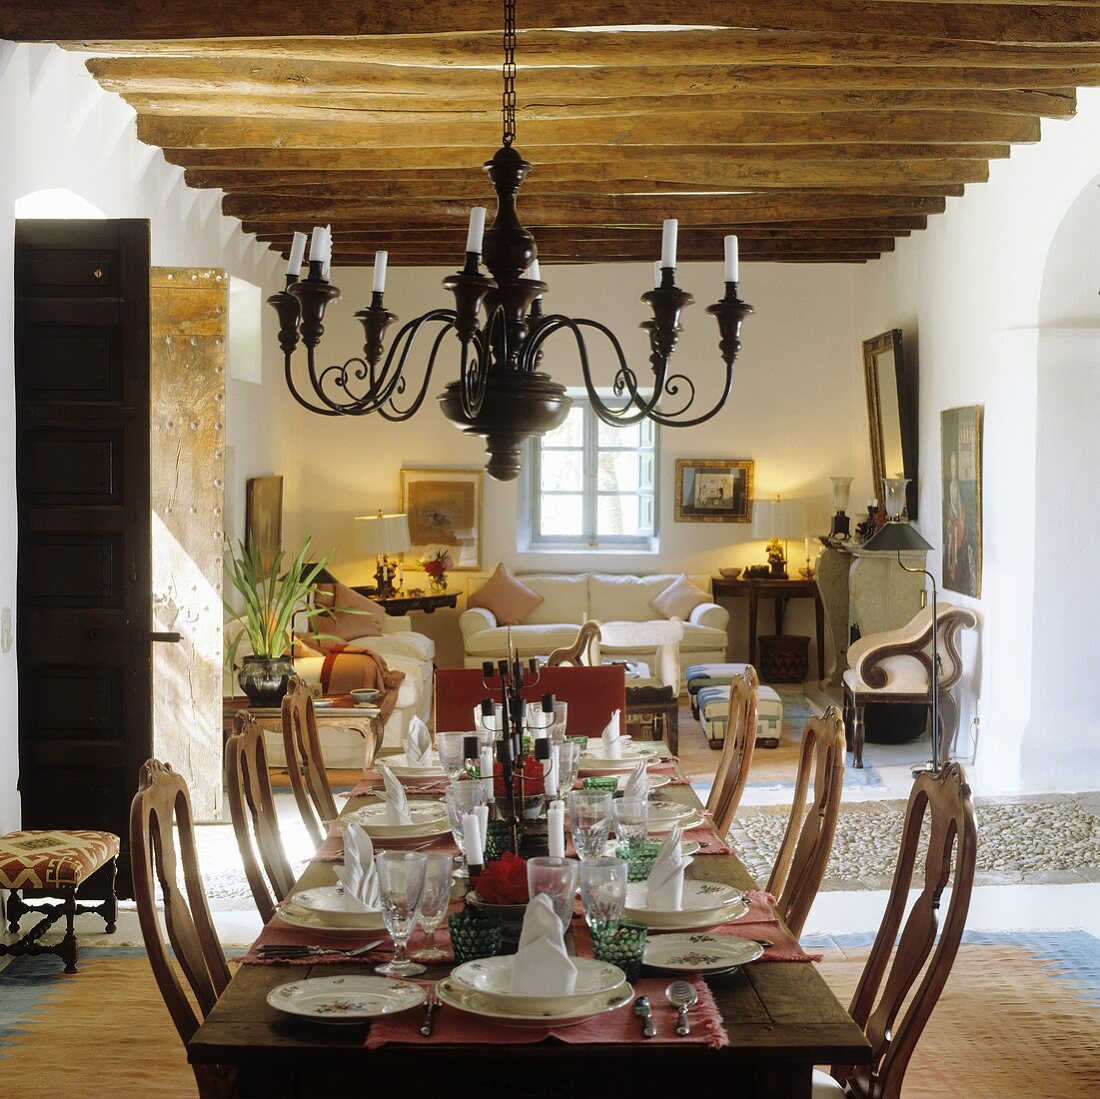 A Chandelier Hanging From Wooden, When Hanging A Chandelier Over Dining Table